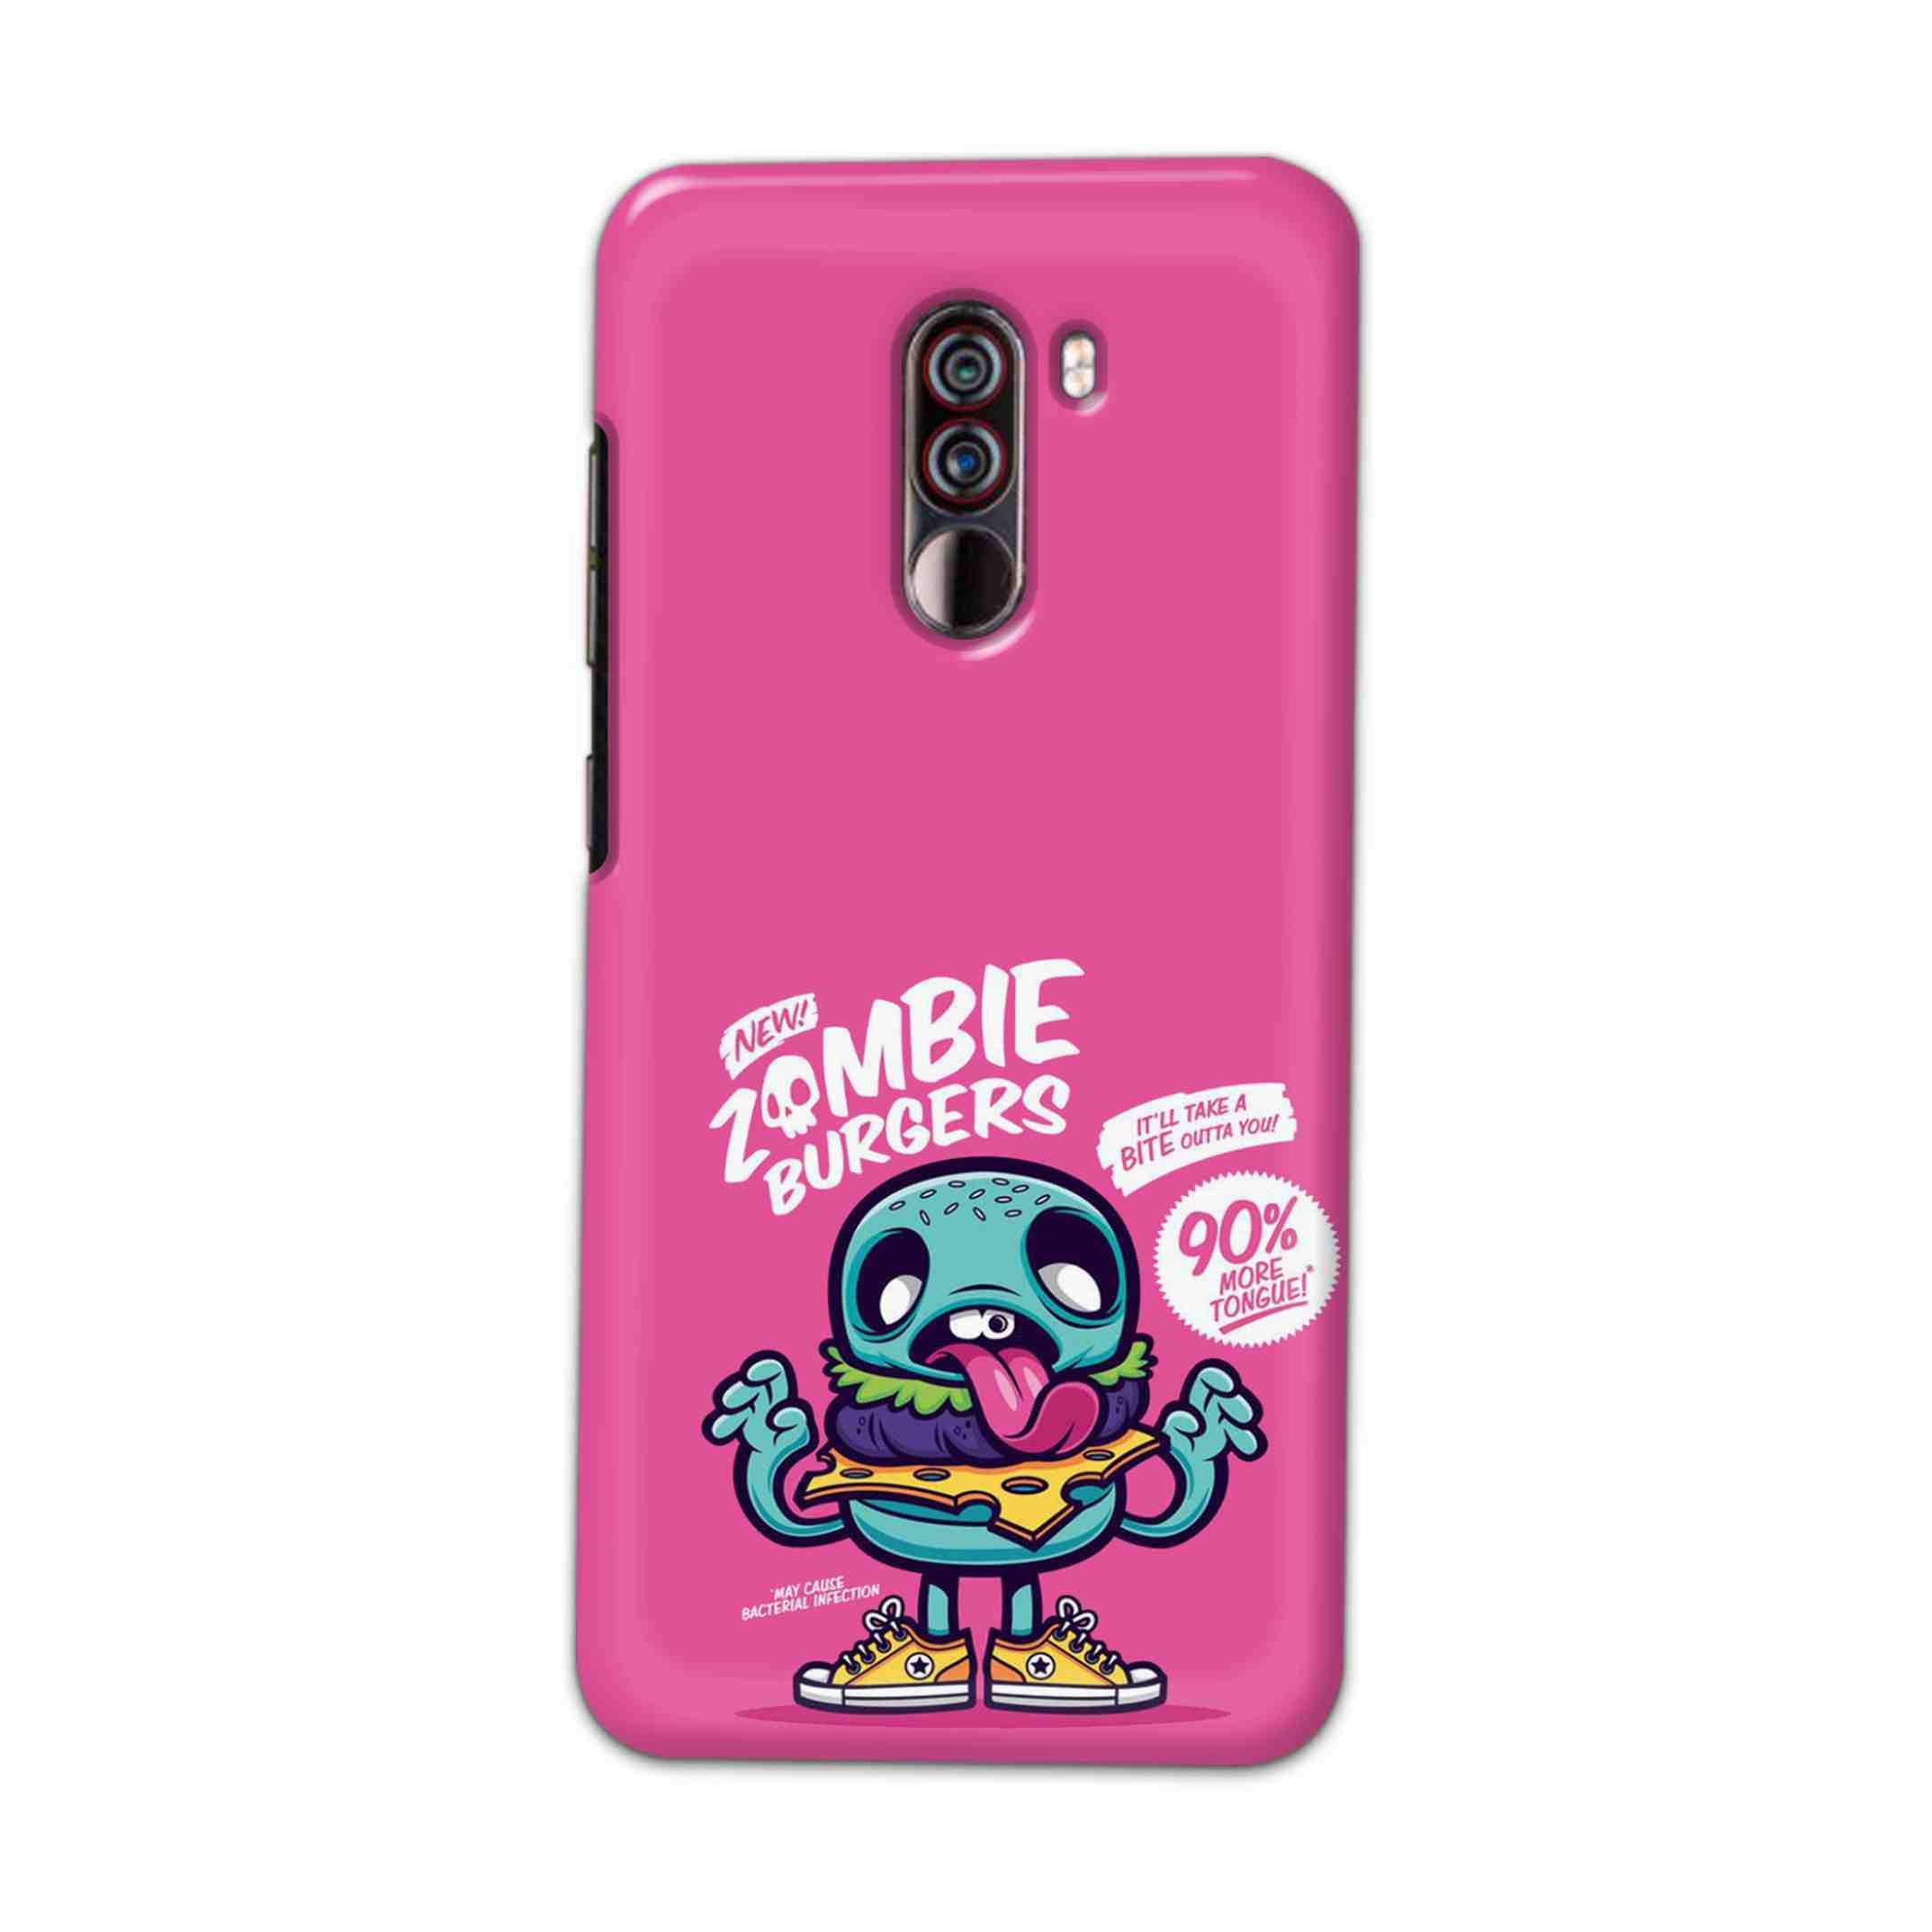 Buy New Zombie Burgers Hard Back Mobile Phone Case Cover For Xiaomi Pocophone F1 Online